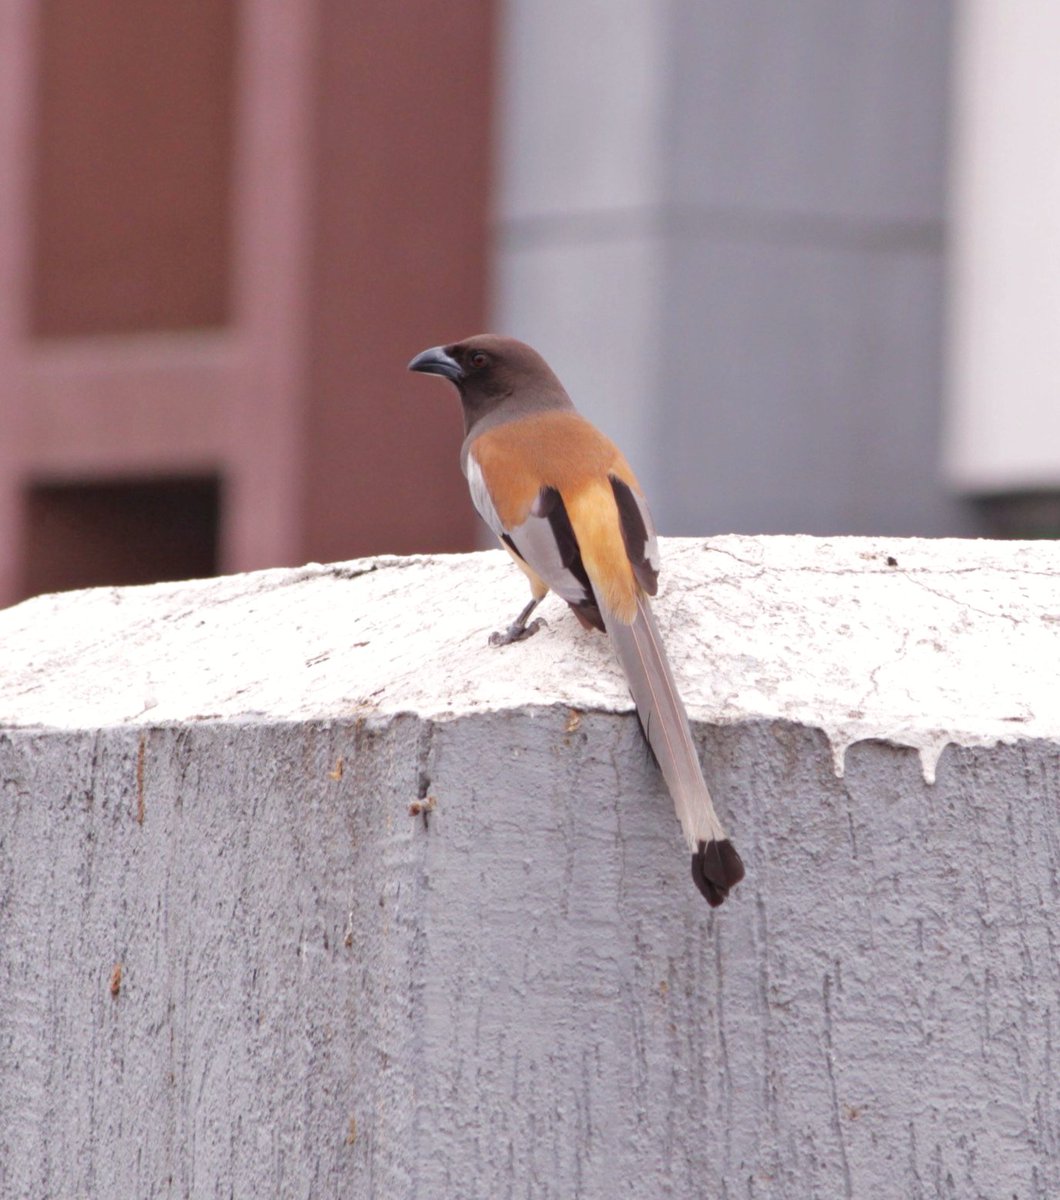 Rufoustreepie, morning visitors #IndiAves #nature #birdwatching